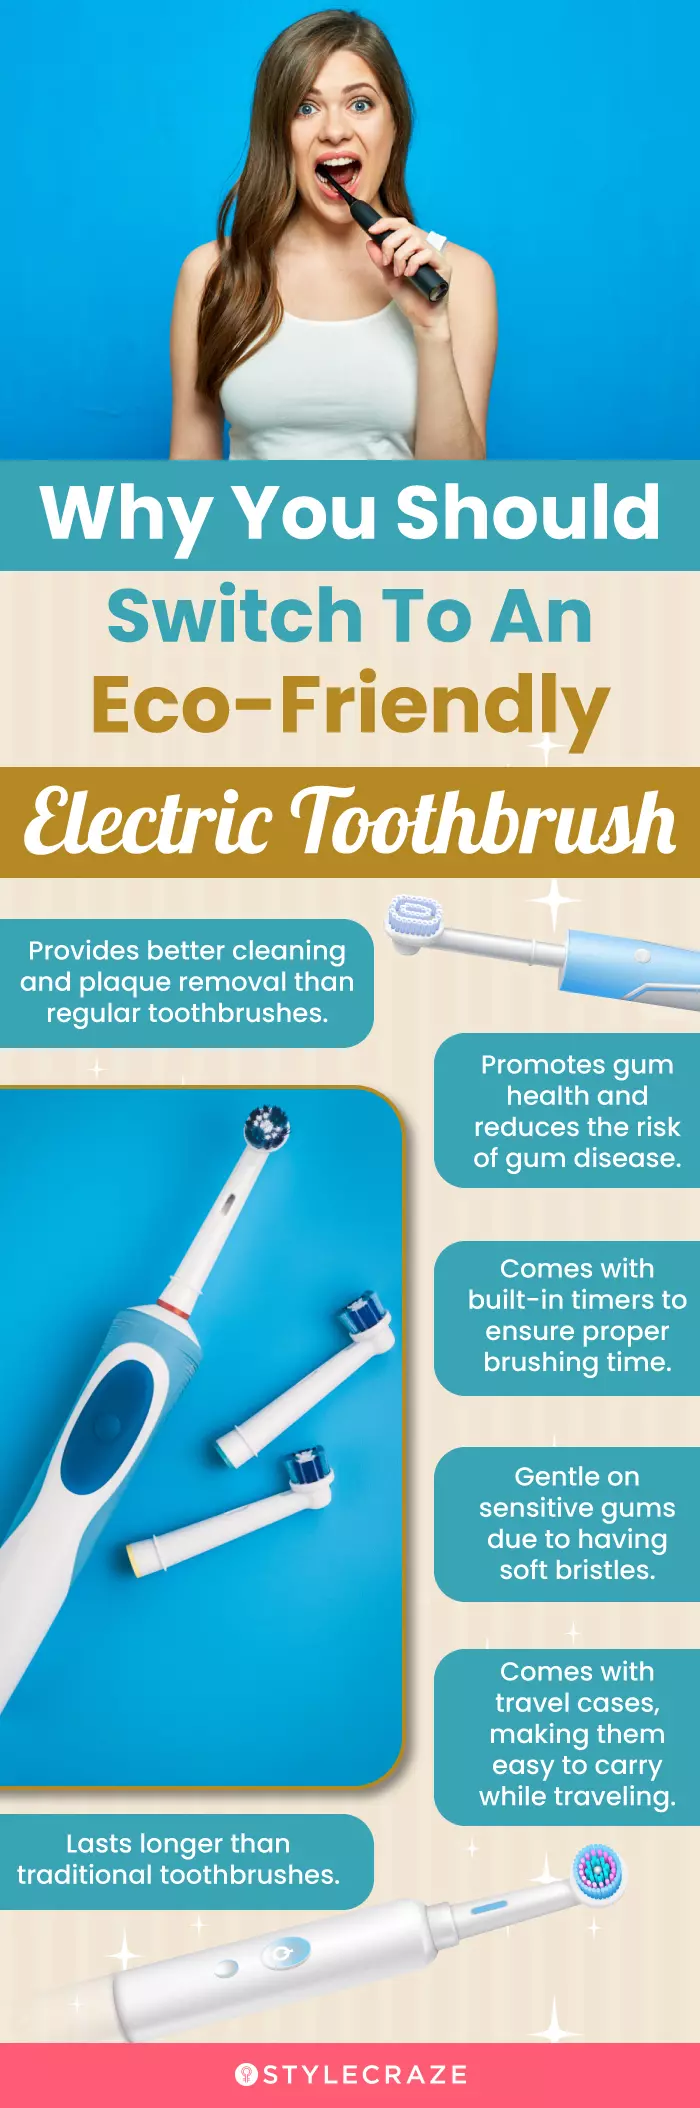 Why You Should Switch To An Eco-Friendly Electric Toothbrush (infographic)